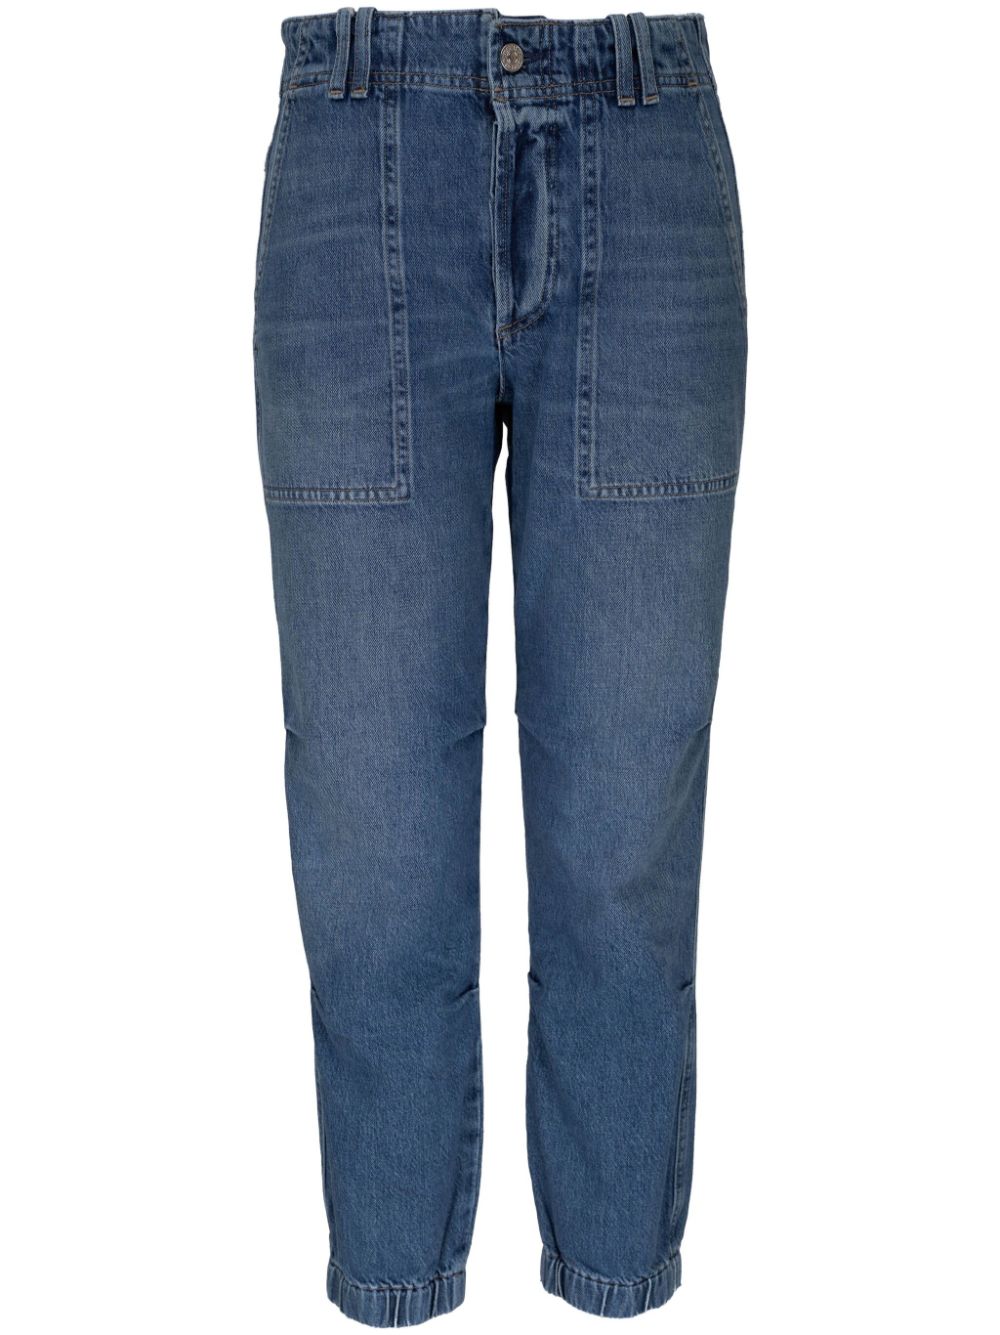 Citizens of Humanity Agni utility slim-cut jeans - Blue von Citizens of Humanity